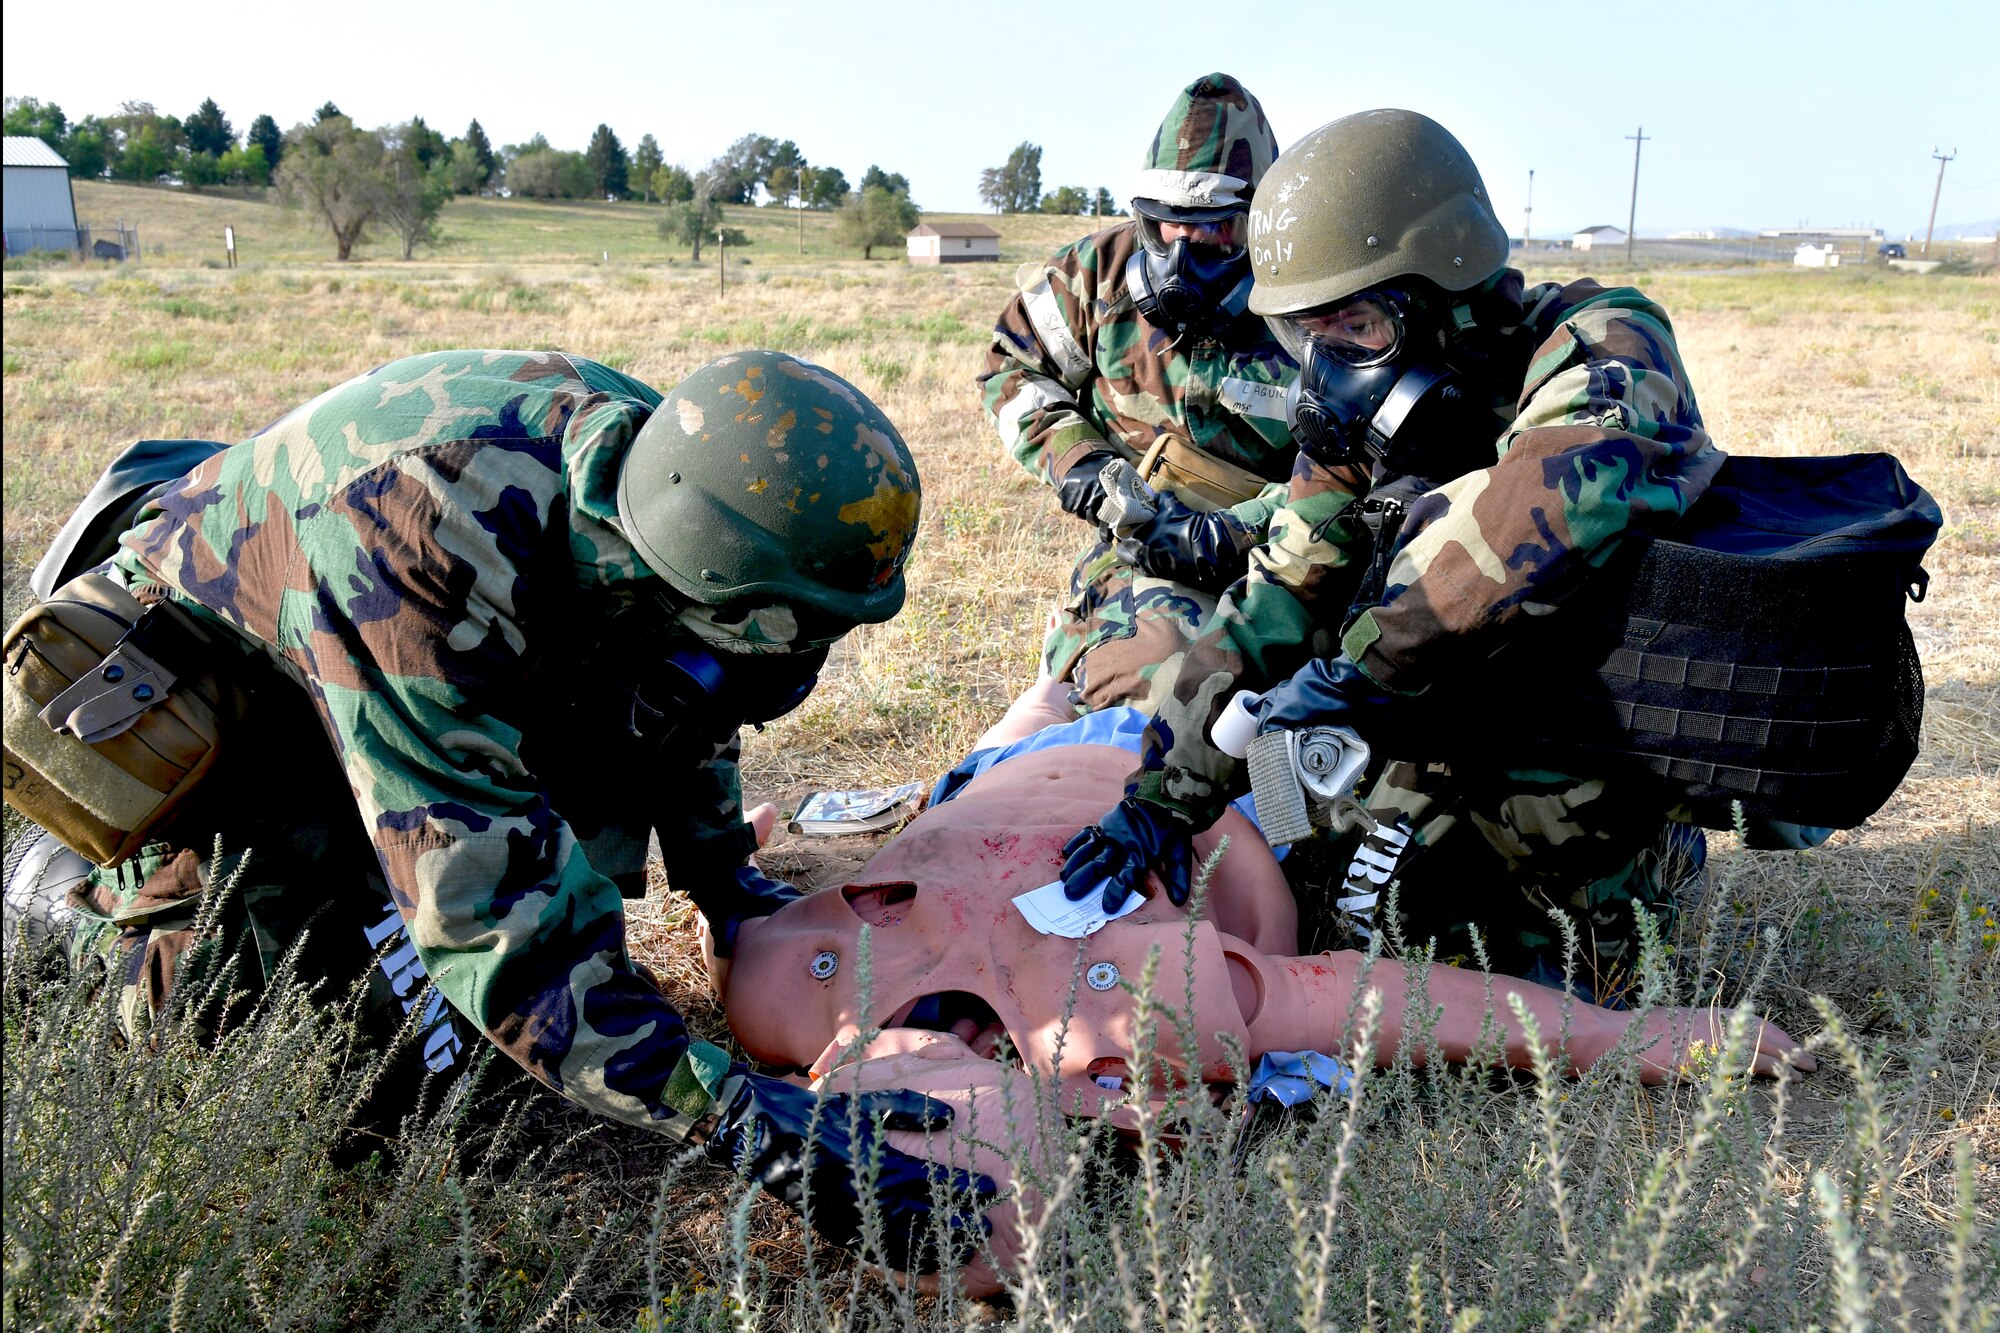 (Left to right) Chaplain (Capt.) Jeffrey Larsen, 75th Air Base Wing chapel, Master Sgt. Christopher Aguilar, 75th Air Base Wing safety office, and Senior Airman Ashley Epperson, 75th Communications and Information Directorate, practice emergency first-aid on a mannequin during a readiness training exercise.